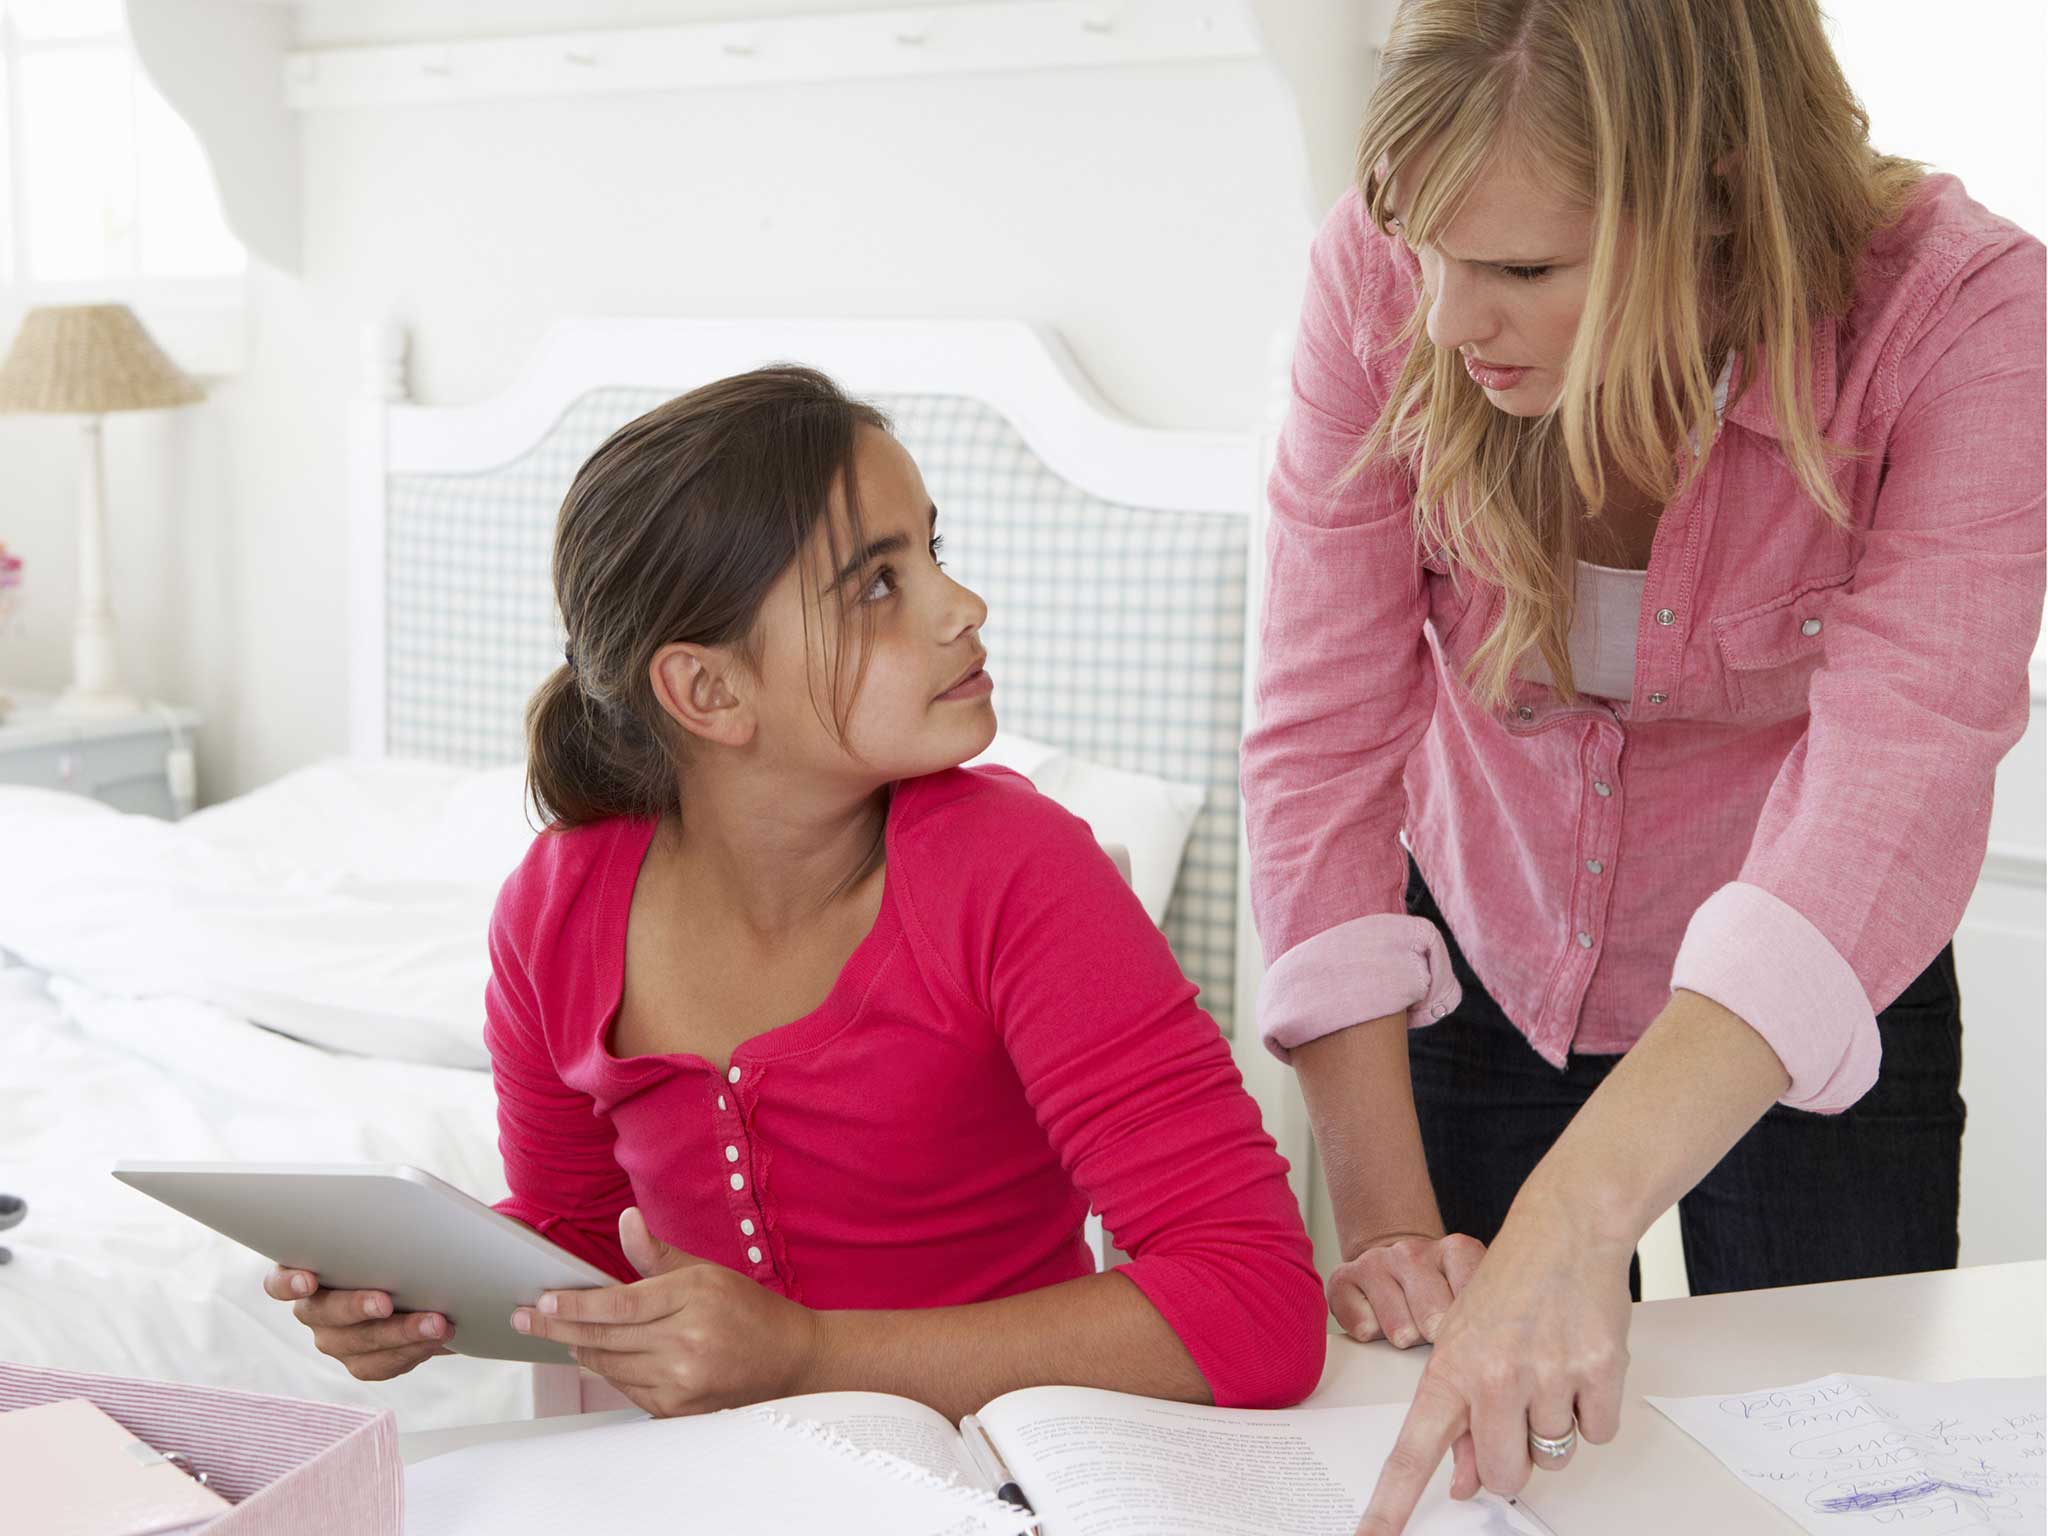 The outburst occured after she tried to help her daughter with her homework